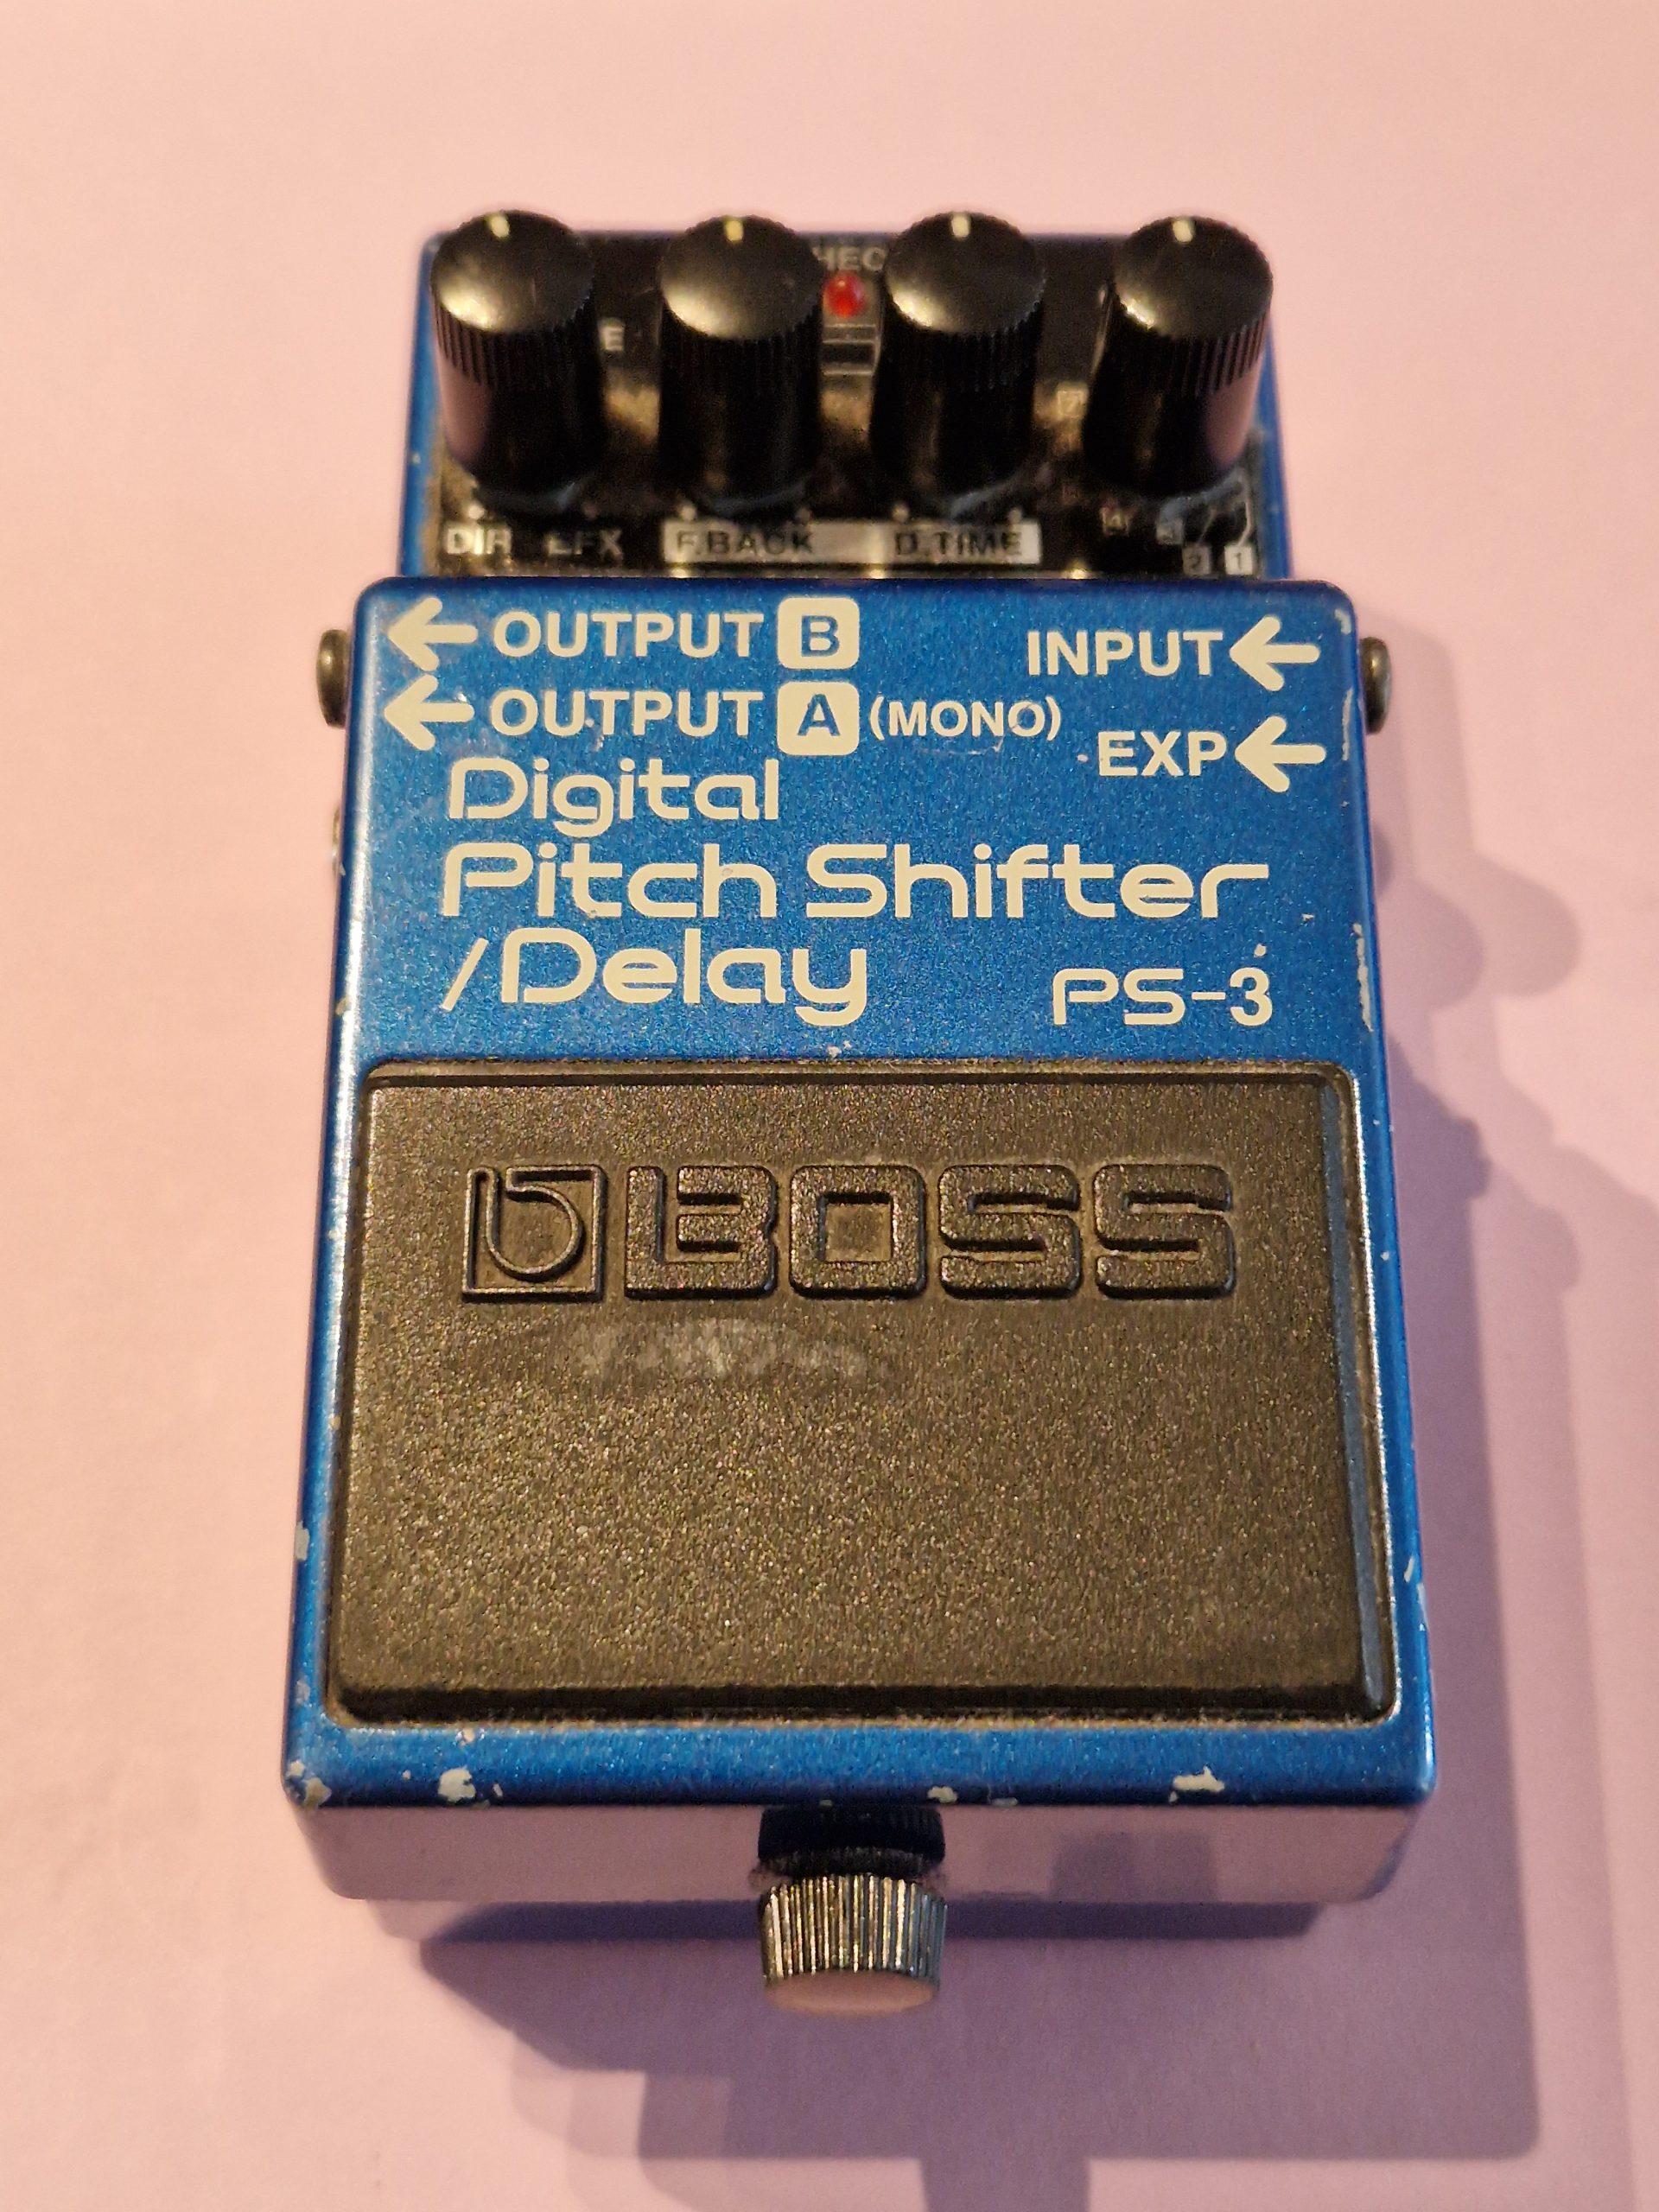 BOSS PS-3 Digital Pitch Shifter/Delay - Effects Pedals